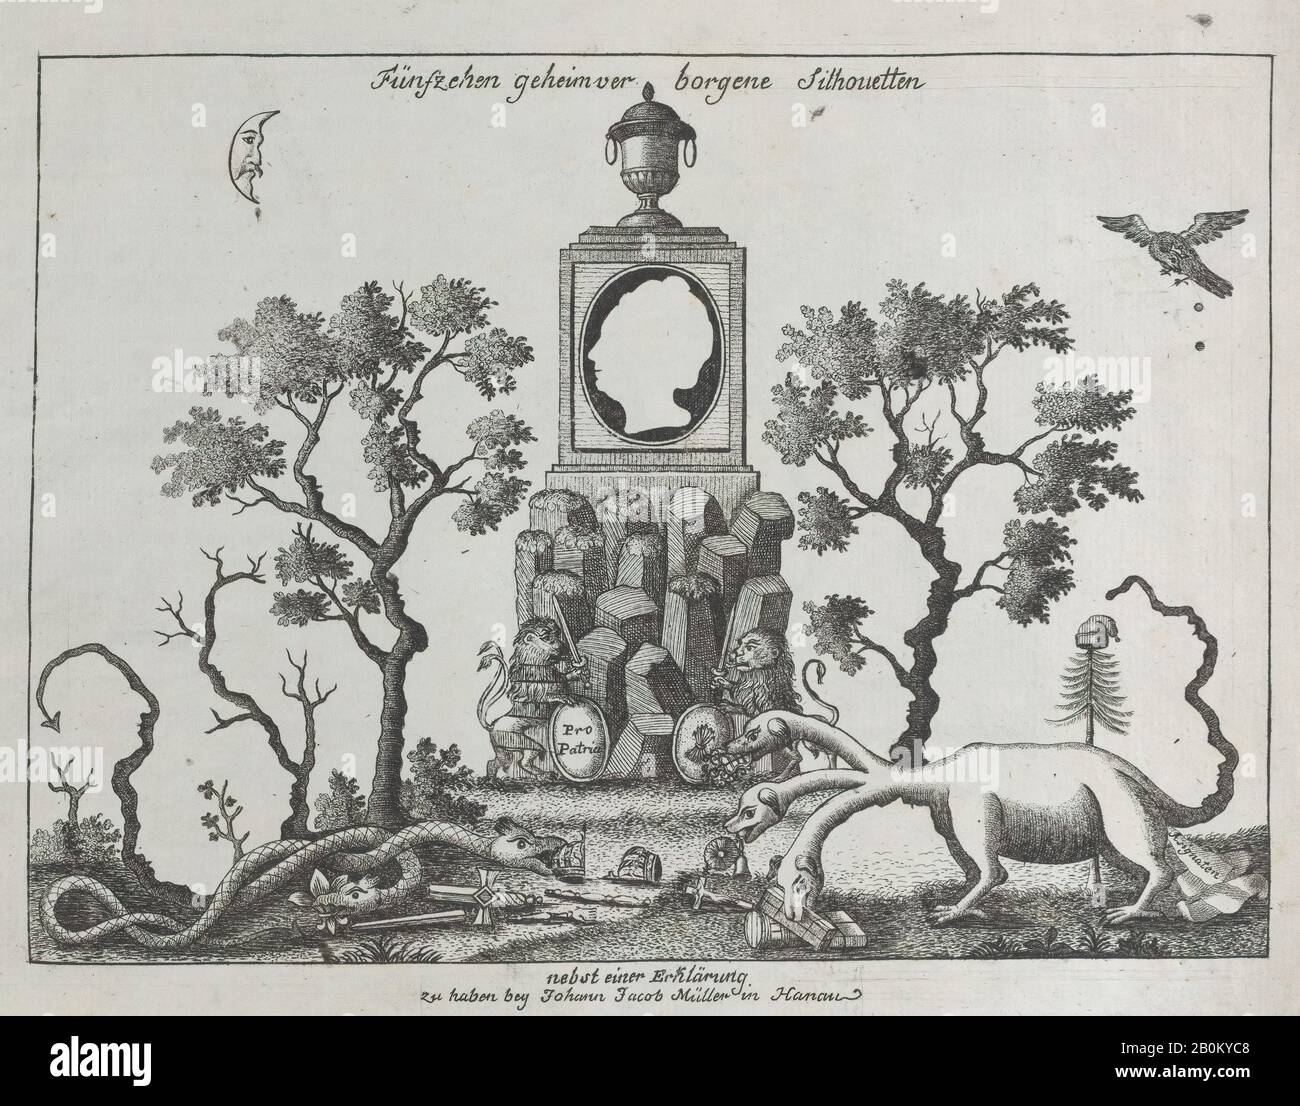 Anonymous, German, 18th century, Landscape containing fifteen silhouettes, Anonymous, German, 18th century, Louis XVI, King of France (French, Versailles 1754–1793 Paris), Louis XVII (French, Versailles 1785–1795 Paris), Marie Antoinette, Queen of France (French (born Austria), Vienna 1755–1792 Paris), Marie Thérèse Charlotte of France (French, Versailles 1778–1851 Lanzenkirchen), Catherine II, Empress of Russia, Maximilien-François-Marie-Isidore de Robespierre (1758–1794), 1793–1800, Etching, crayon technique, Plate: 6 1/2 × 8 1/4 in. (16.5 × 21 cm), Sheet: 7 5/8 × 9 1/4 in. (19.3 × 23.5 cm Stock Photo